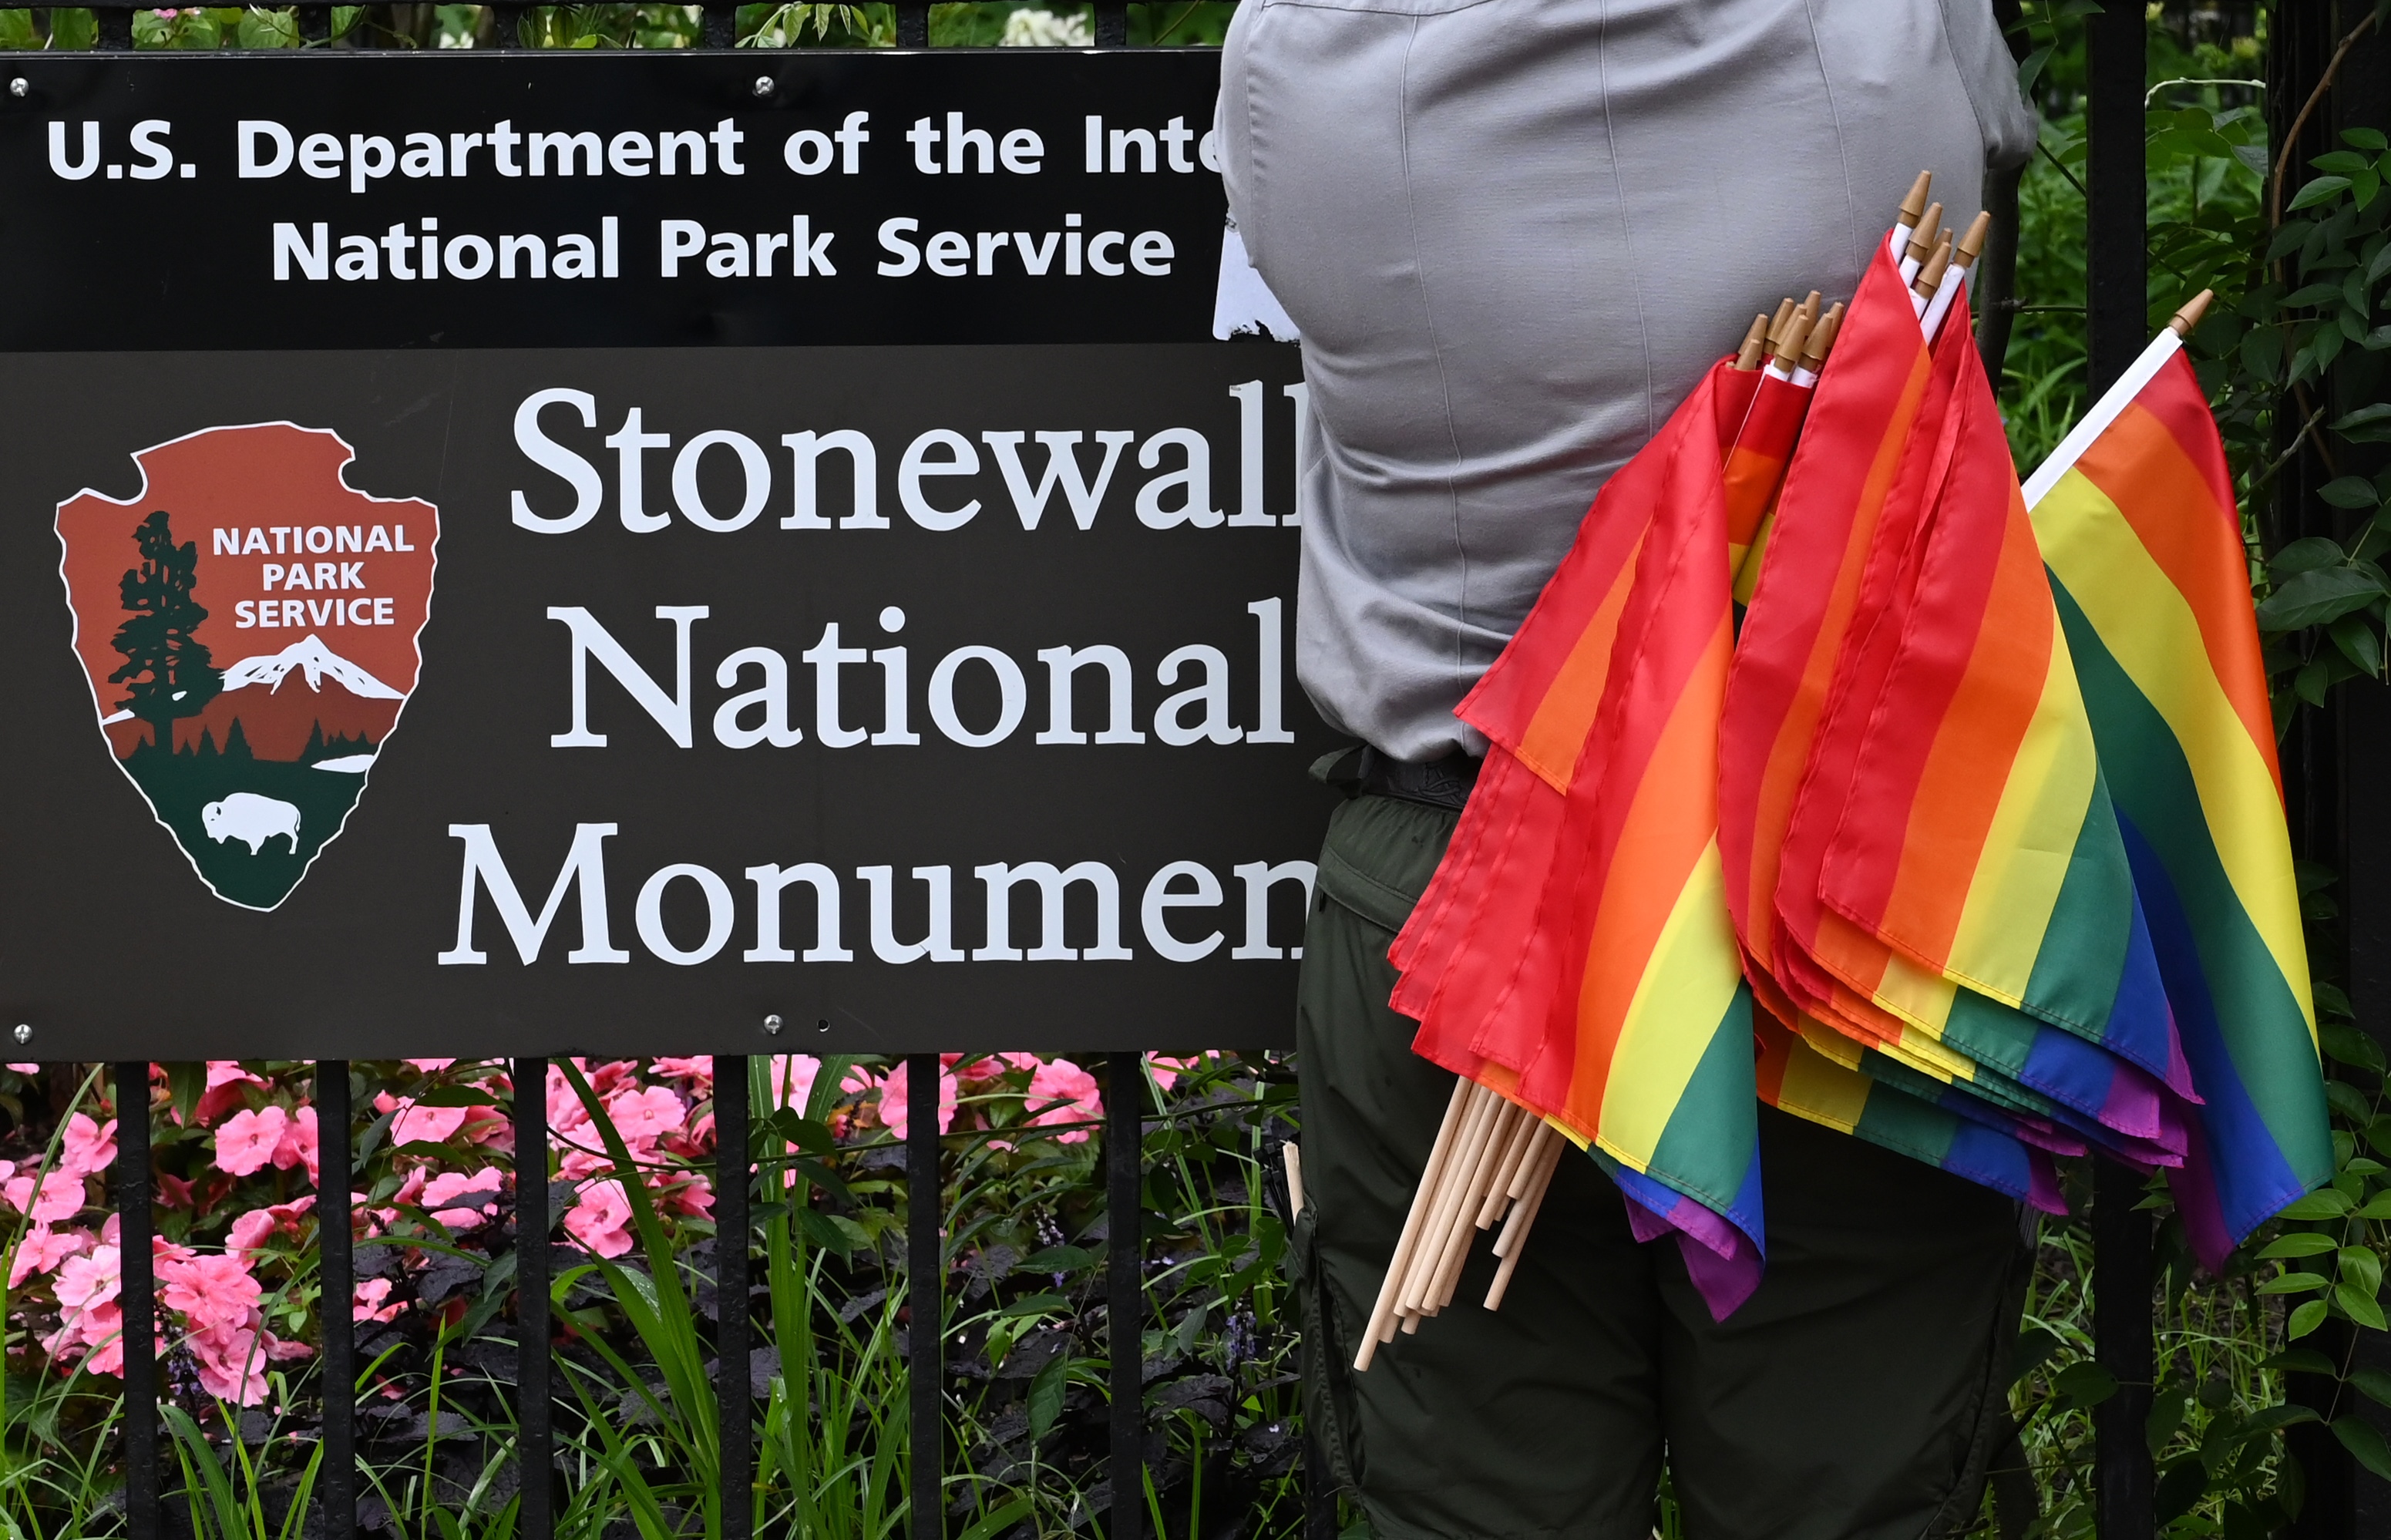 A National Park Service ranger places rainbow flags on the fence at the Stonewall National Monument in the West Village neighborhood of Greenwich Village in Lower Manhattan, New York City on June 19, 2019.